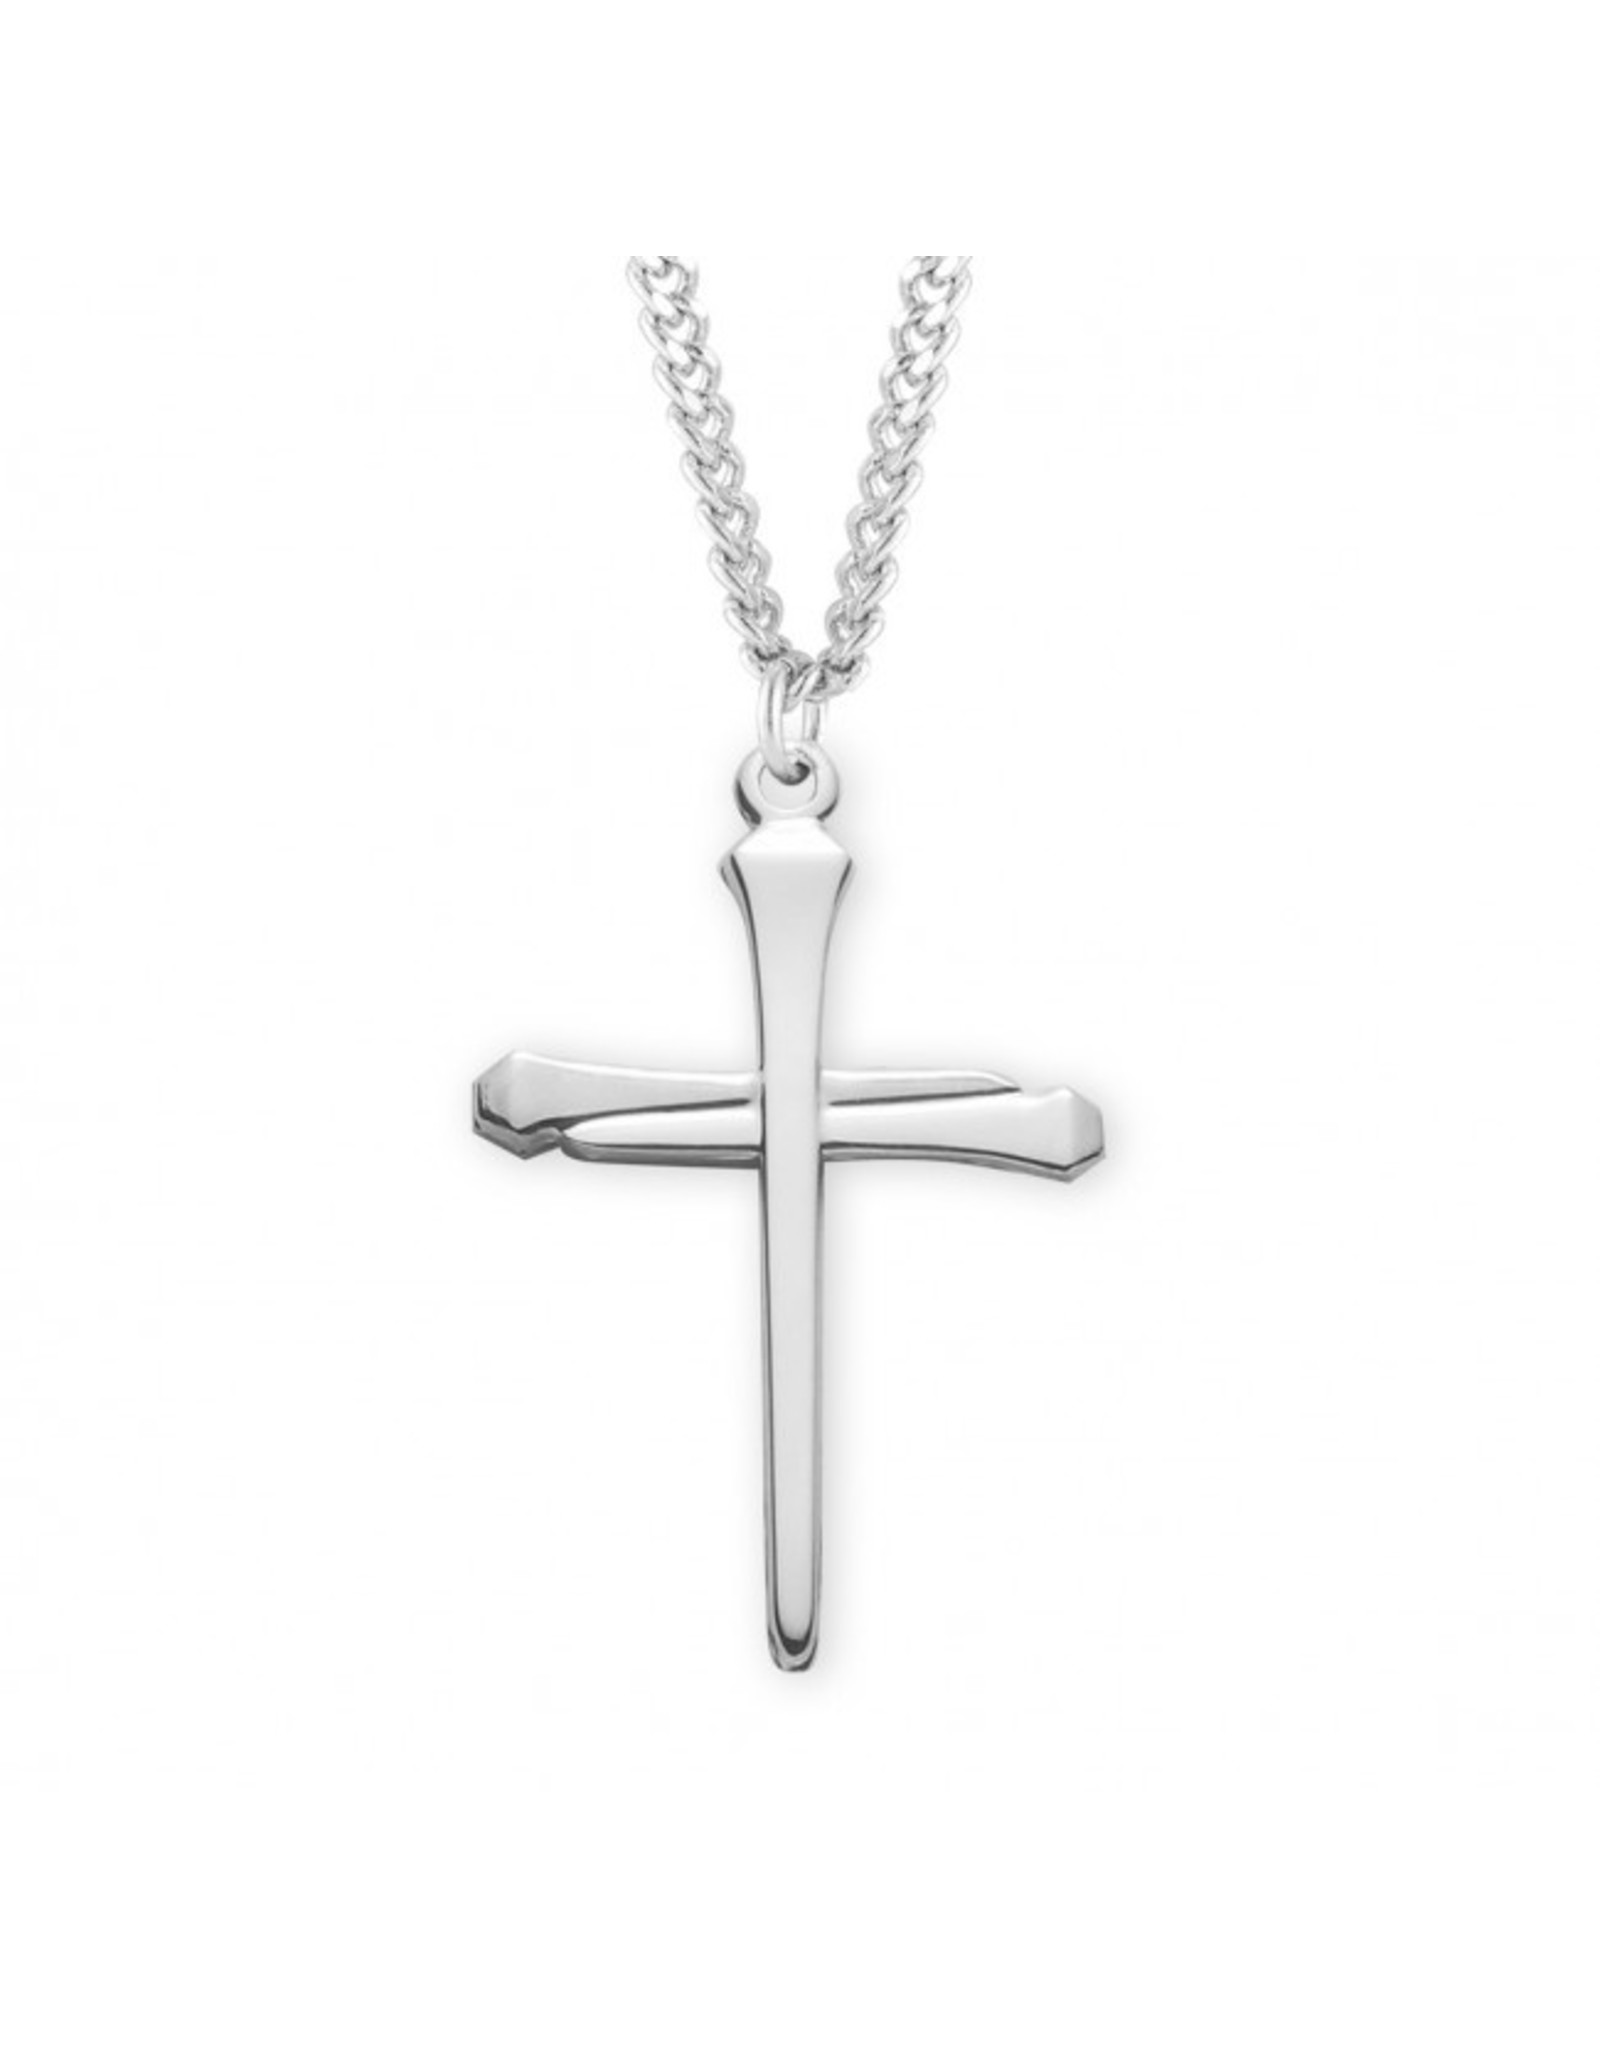 Nail Cross Necklace, Sterling Silver